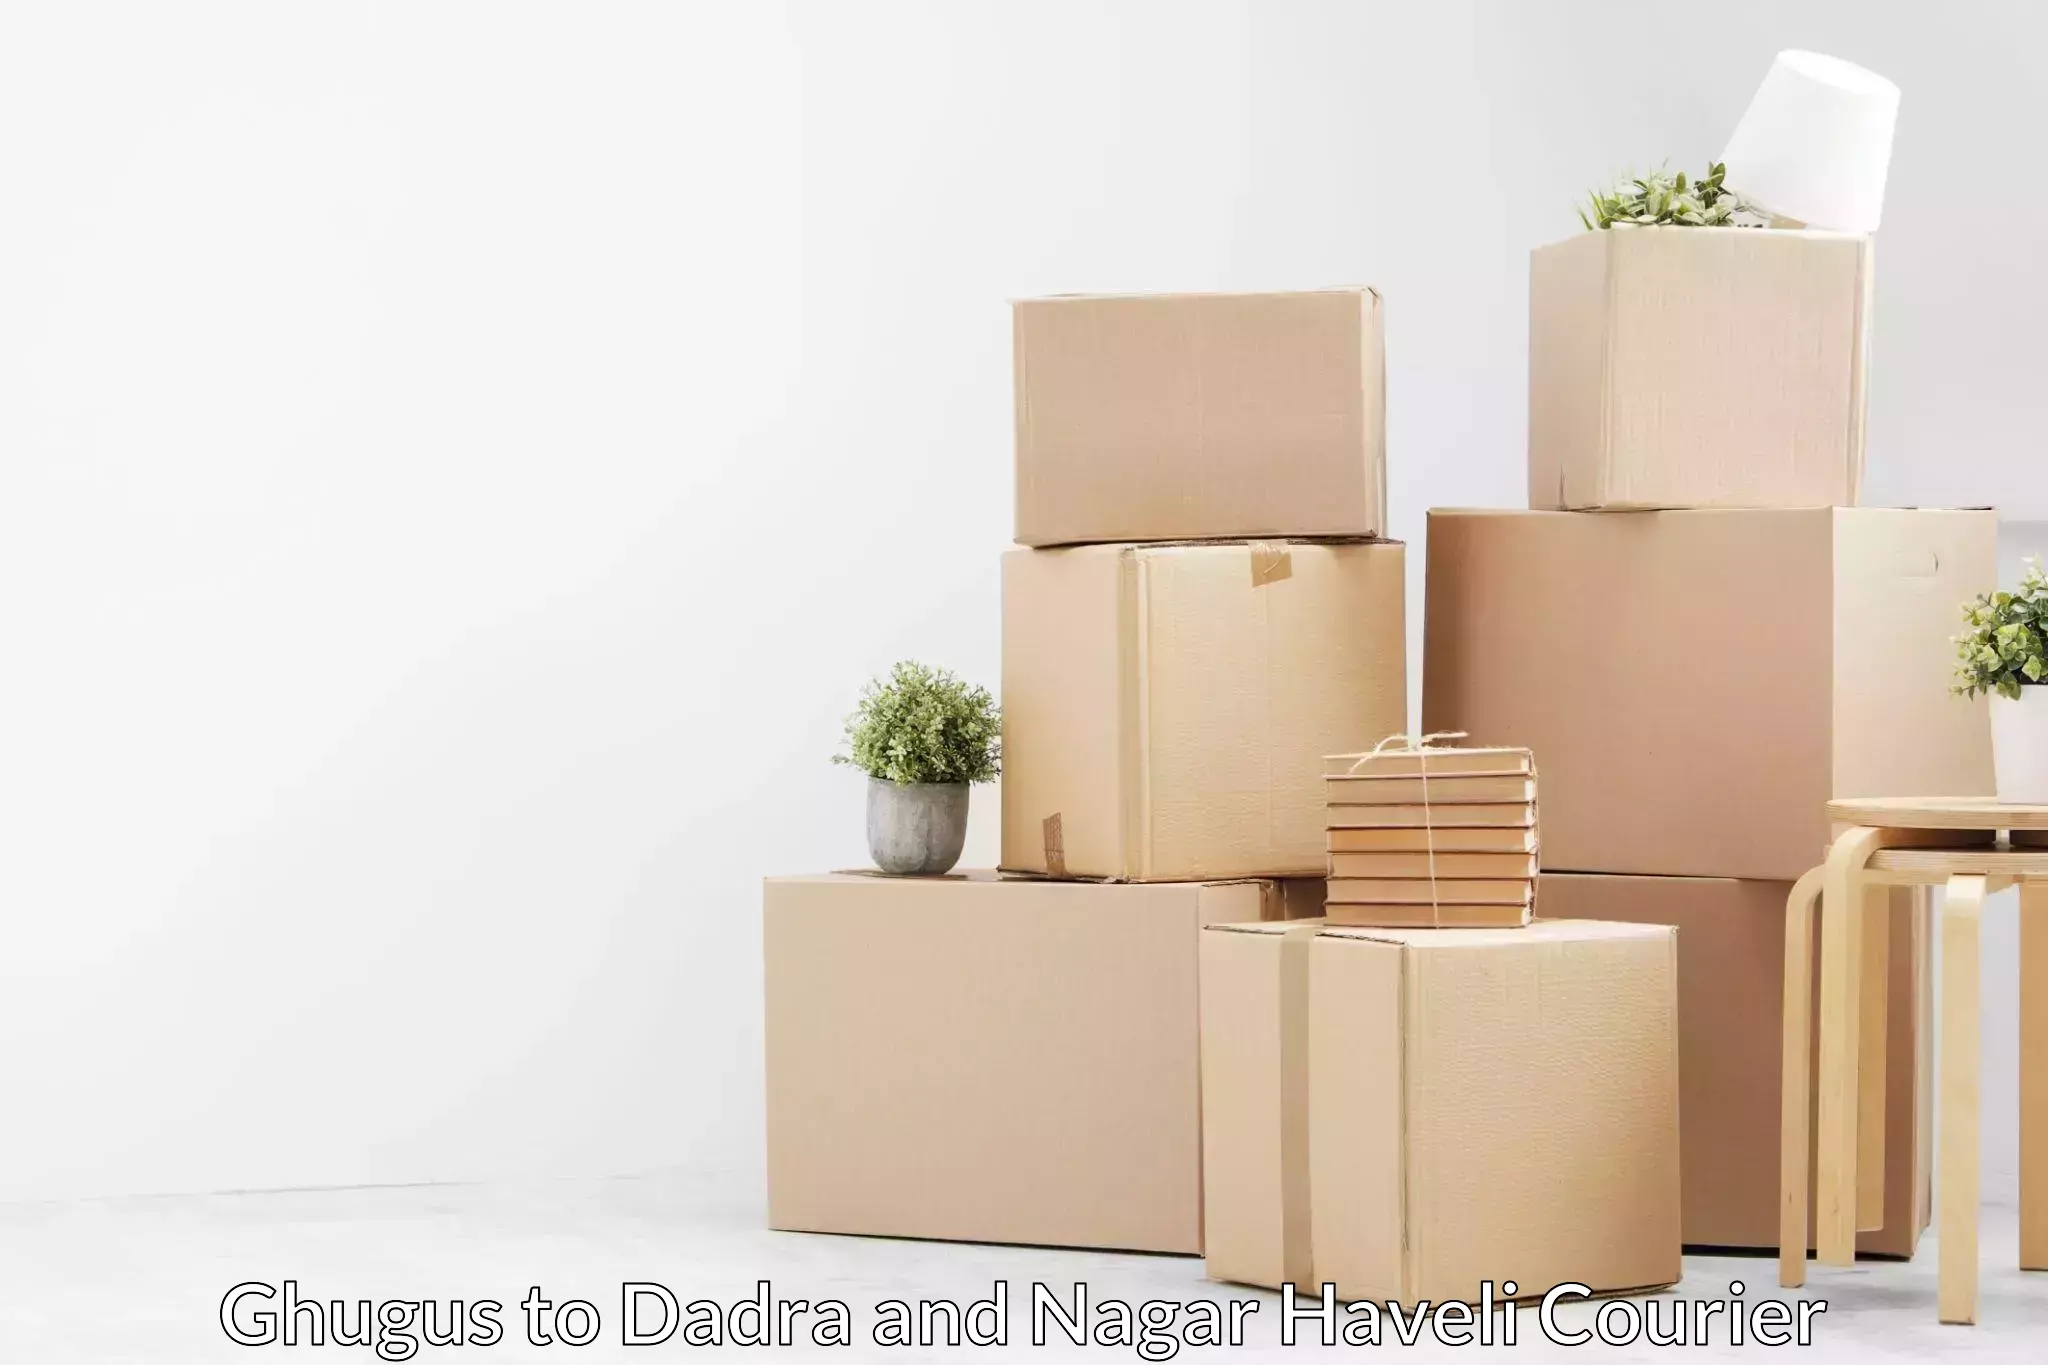 Hassle-free relocation Ghugus to Dadra and Nagar Haveli